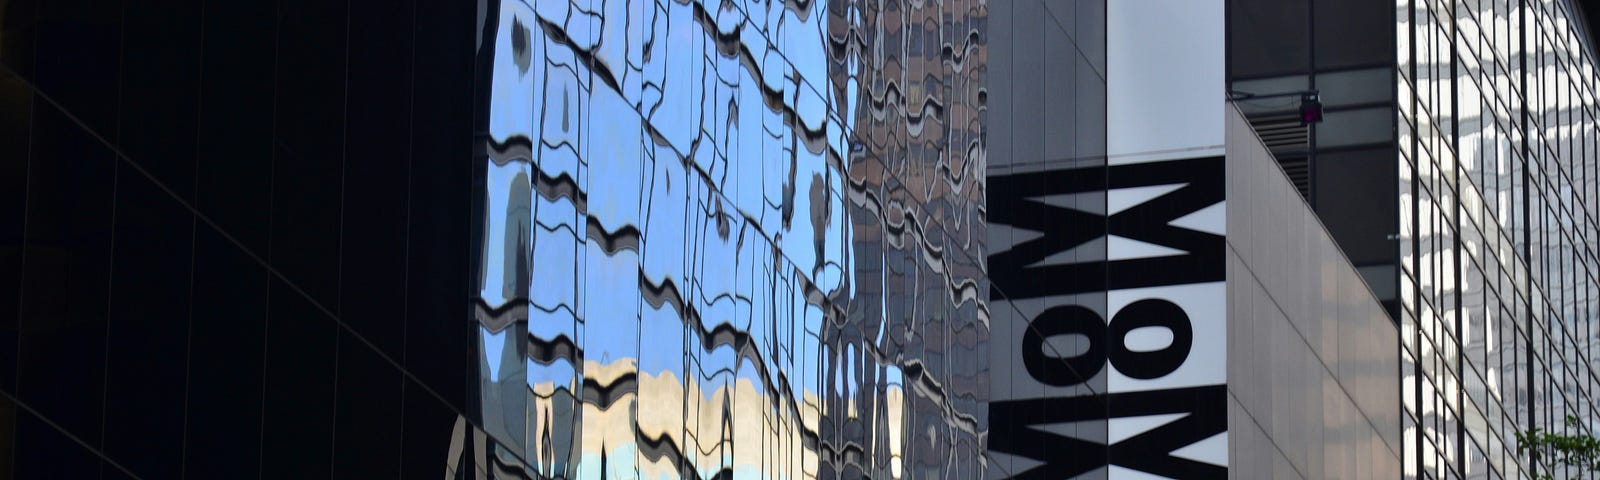 Photo of the shiny, reflecting steel front of the building of the Museum of Modern Art in New York. The sign with the vertical letters “MOMA” sticks out from the facade.